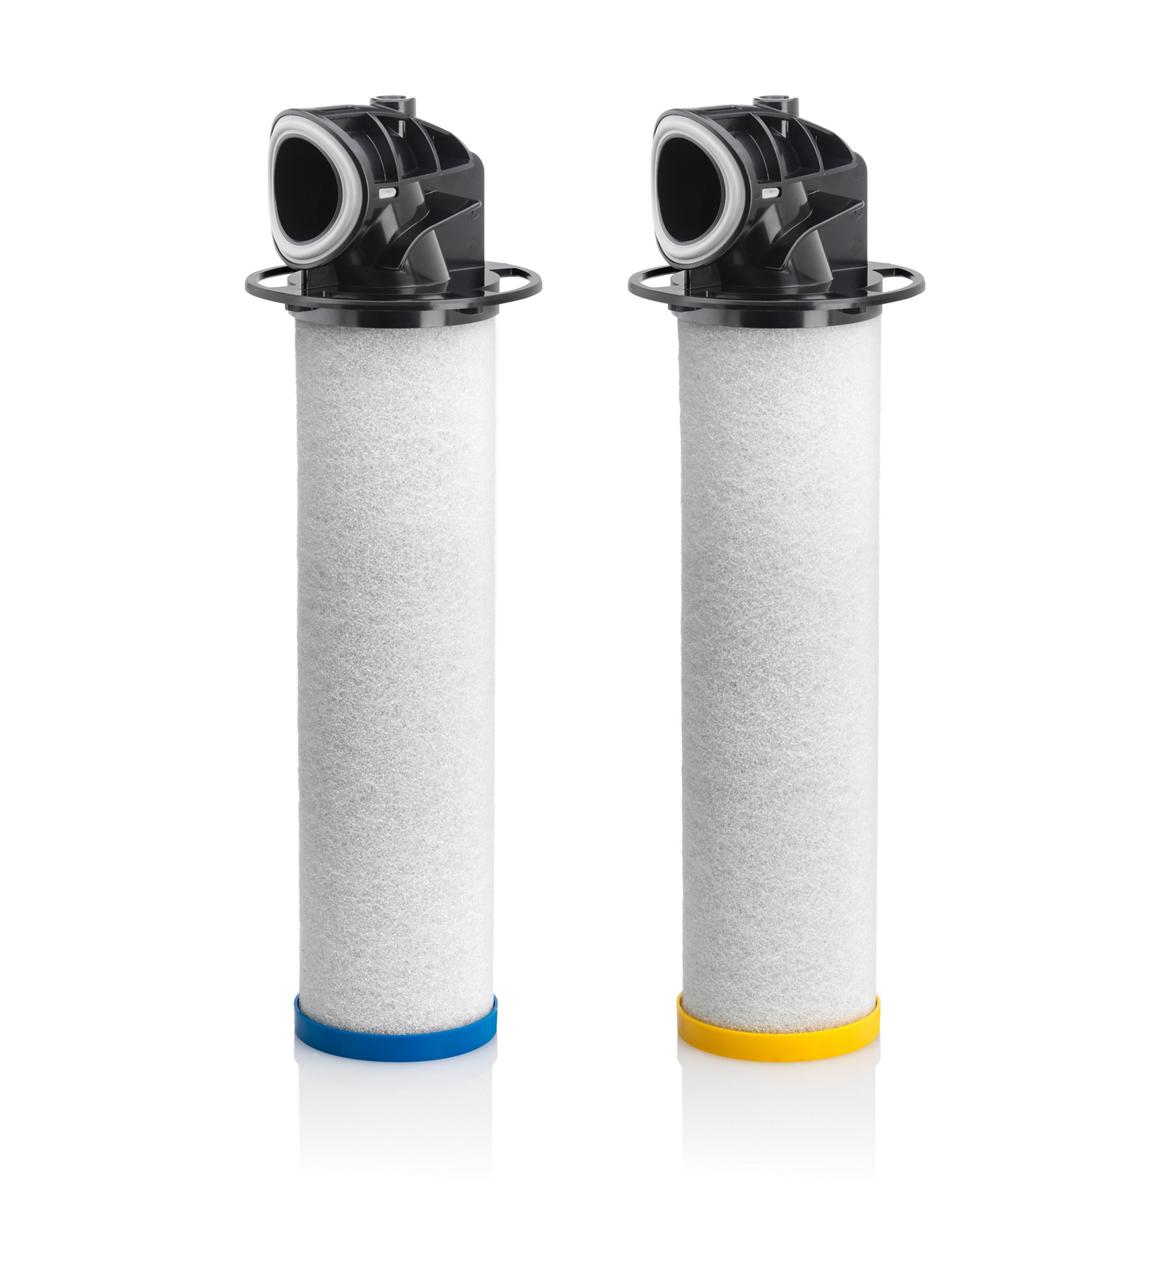 DD+ PD+ Next generation compressed air filters